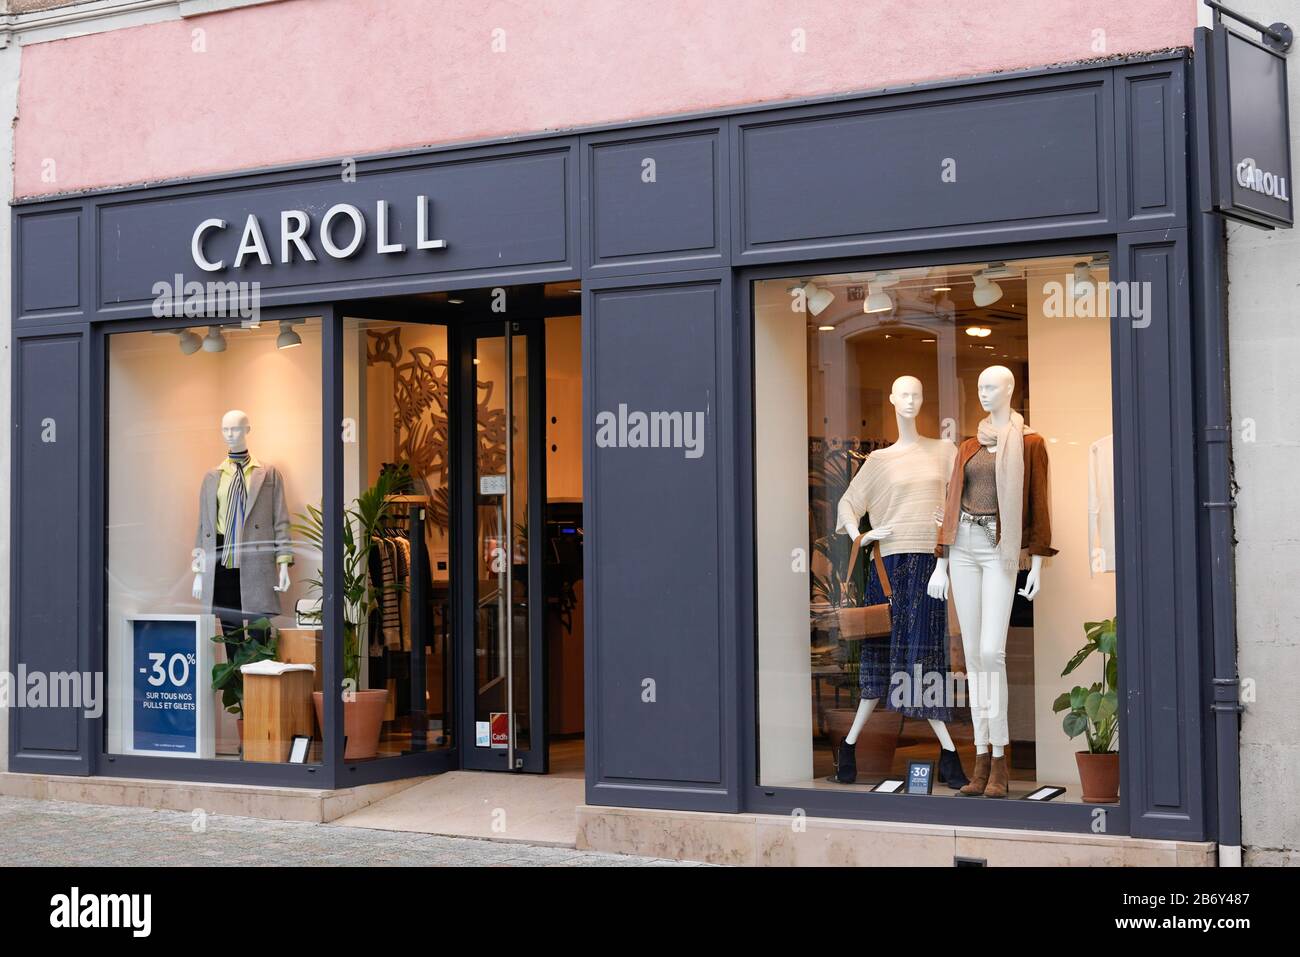 Bordeaux , Aquitaine / France - 02 21 2020 : Caroll logo sign building  fashion clothing store french shop in street for women Stock Photo - Alamy